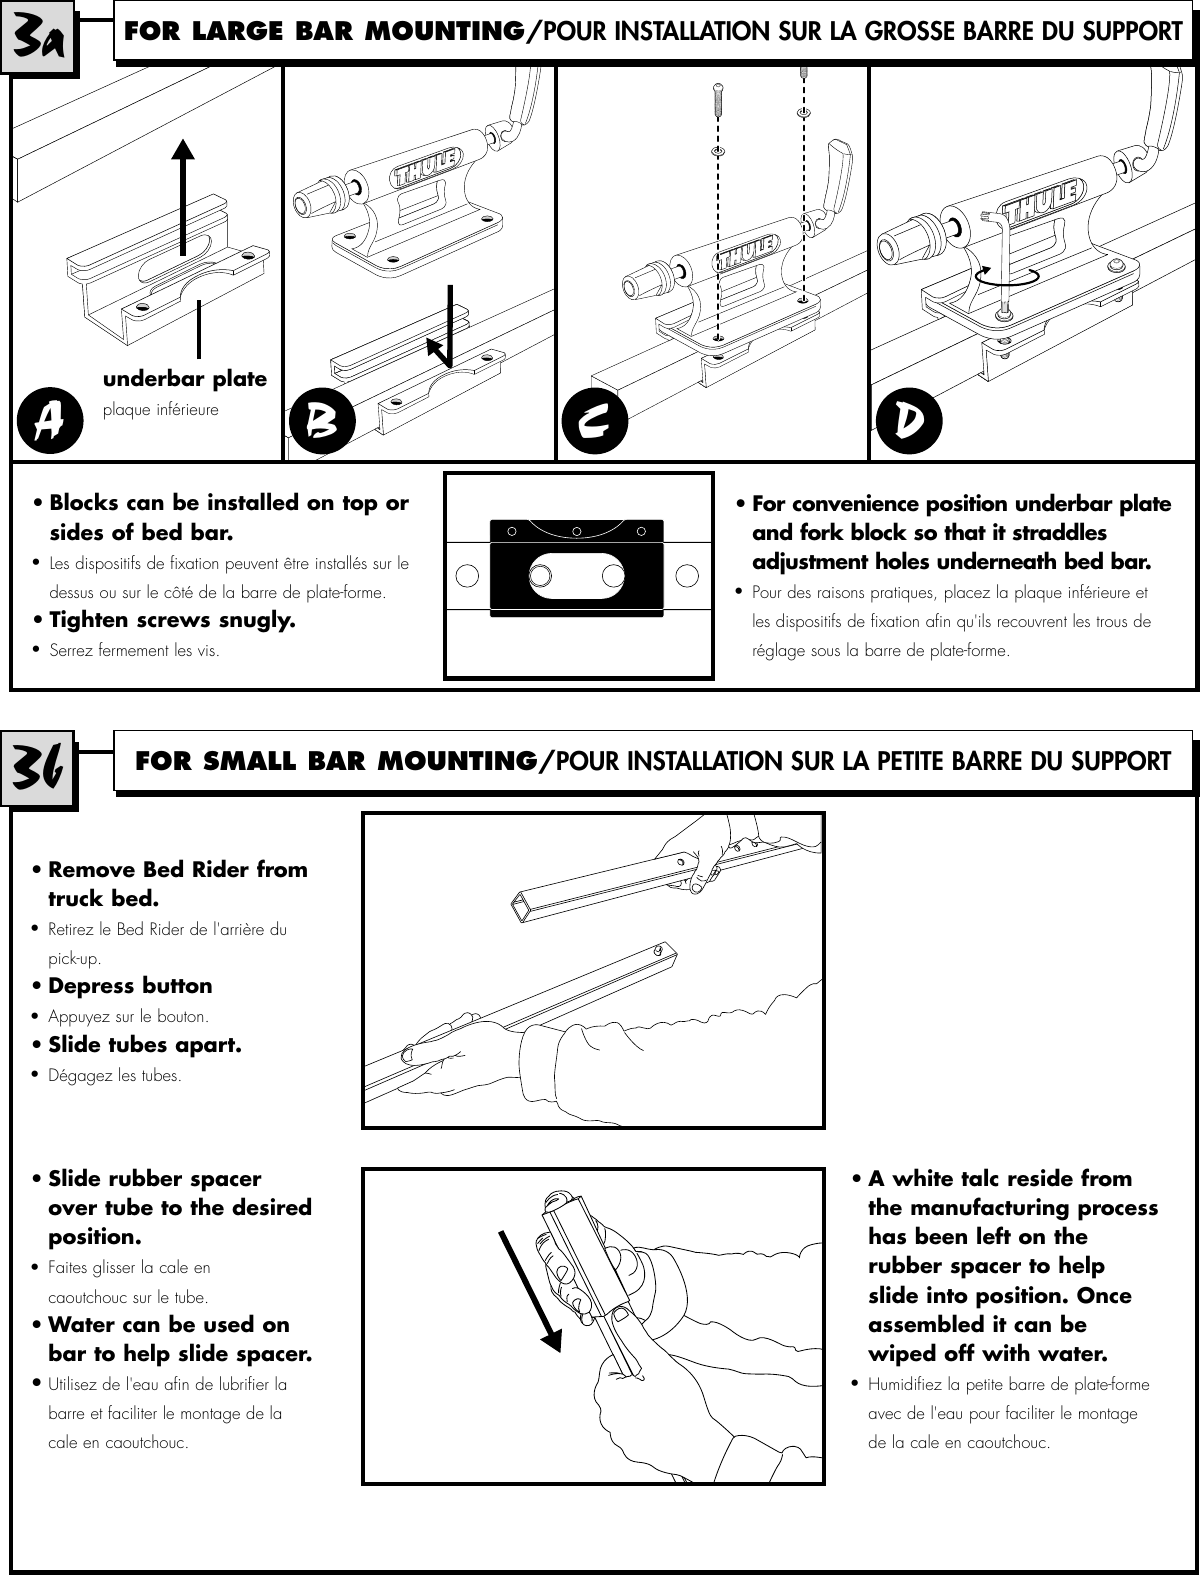 Page 3 of 7 - Thule Thule-Bed-Rider-822-91822-Users-Manual- 501-5326-02#822/91822 Bed Rider  Thule-bed-rider-822-91822-users-manual